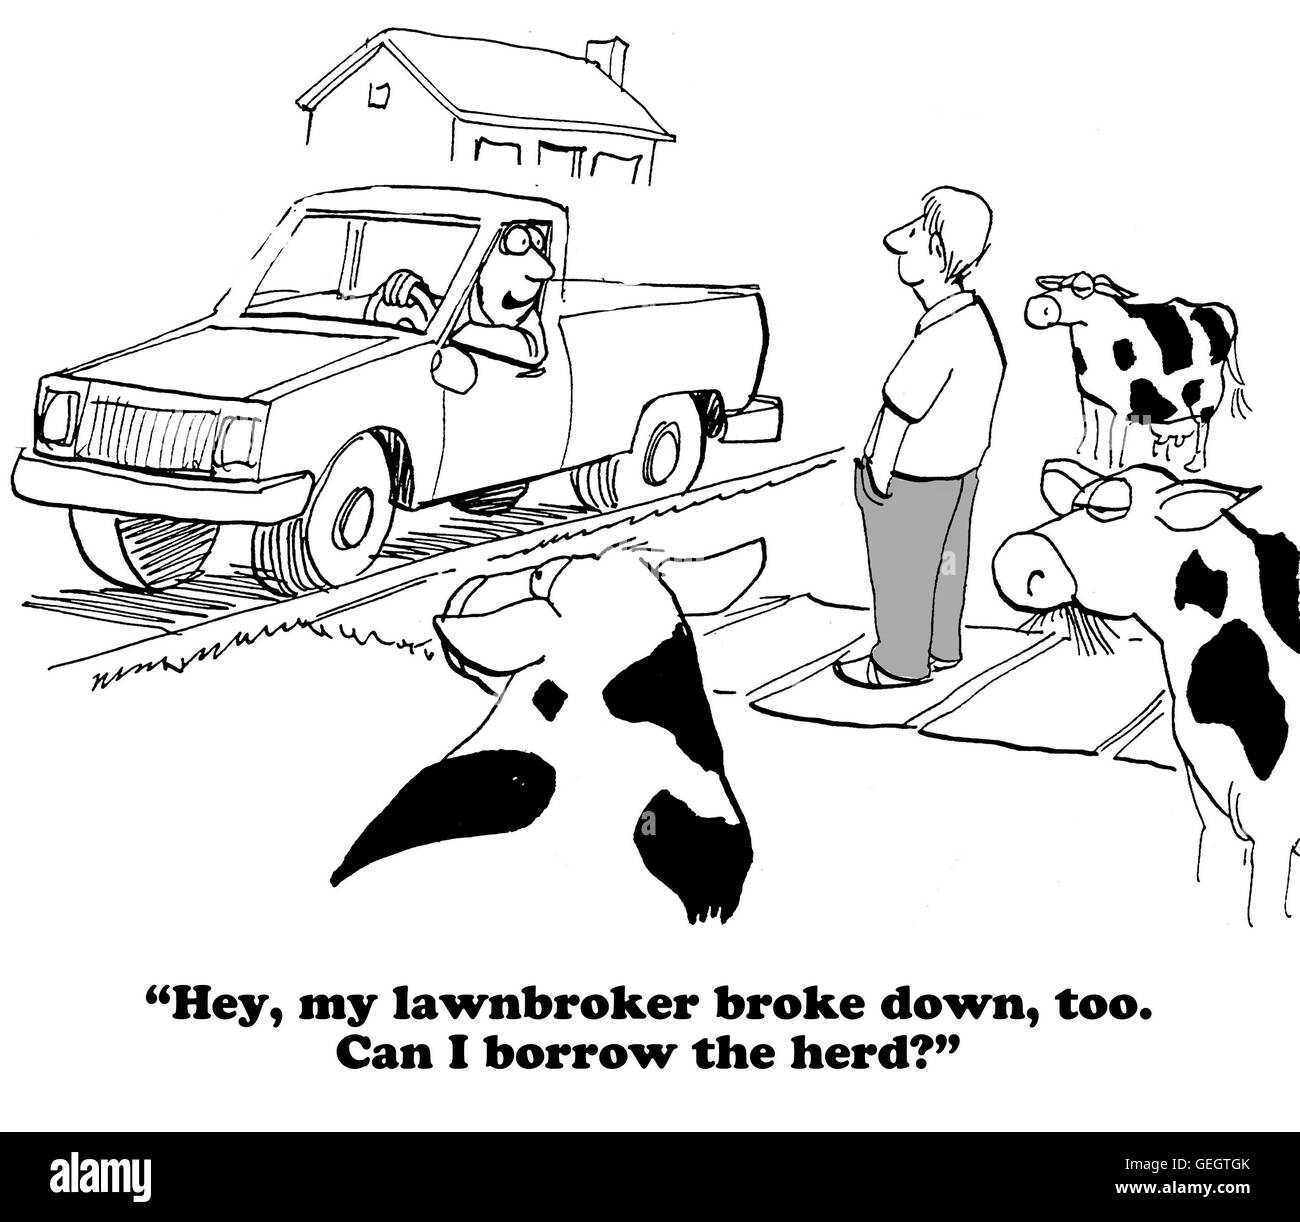 Cartoon about using cows to cut the grass. Stock Photo